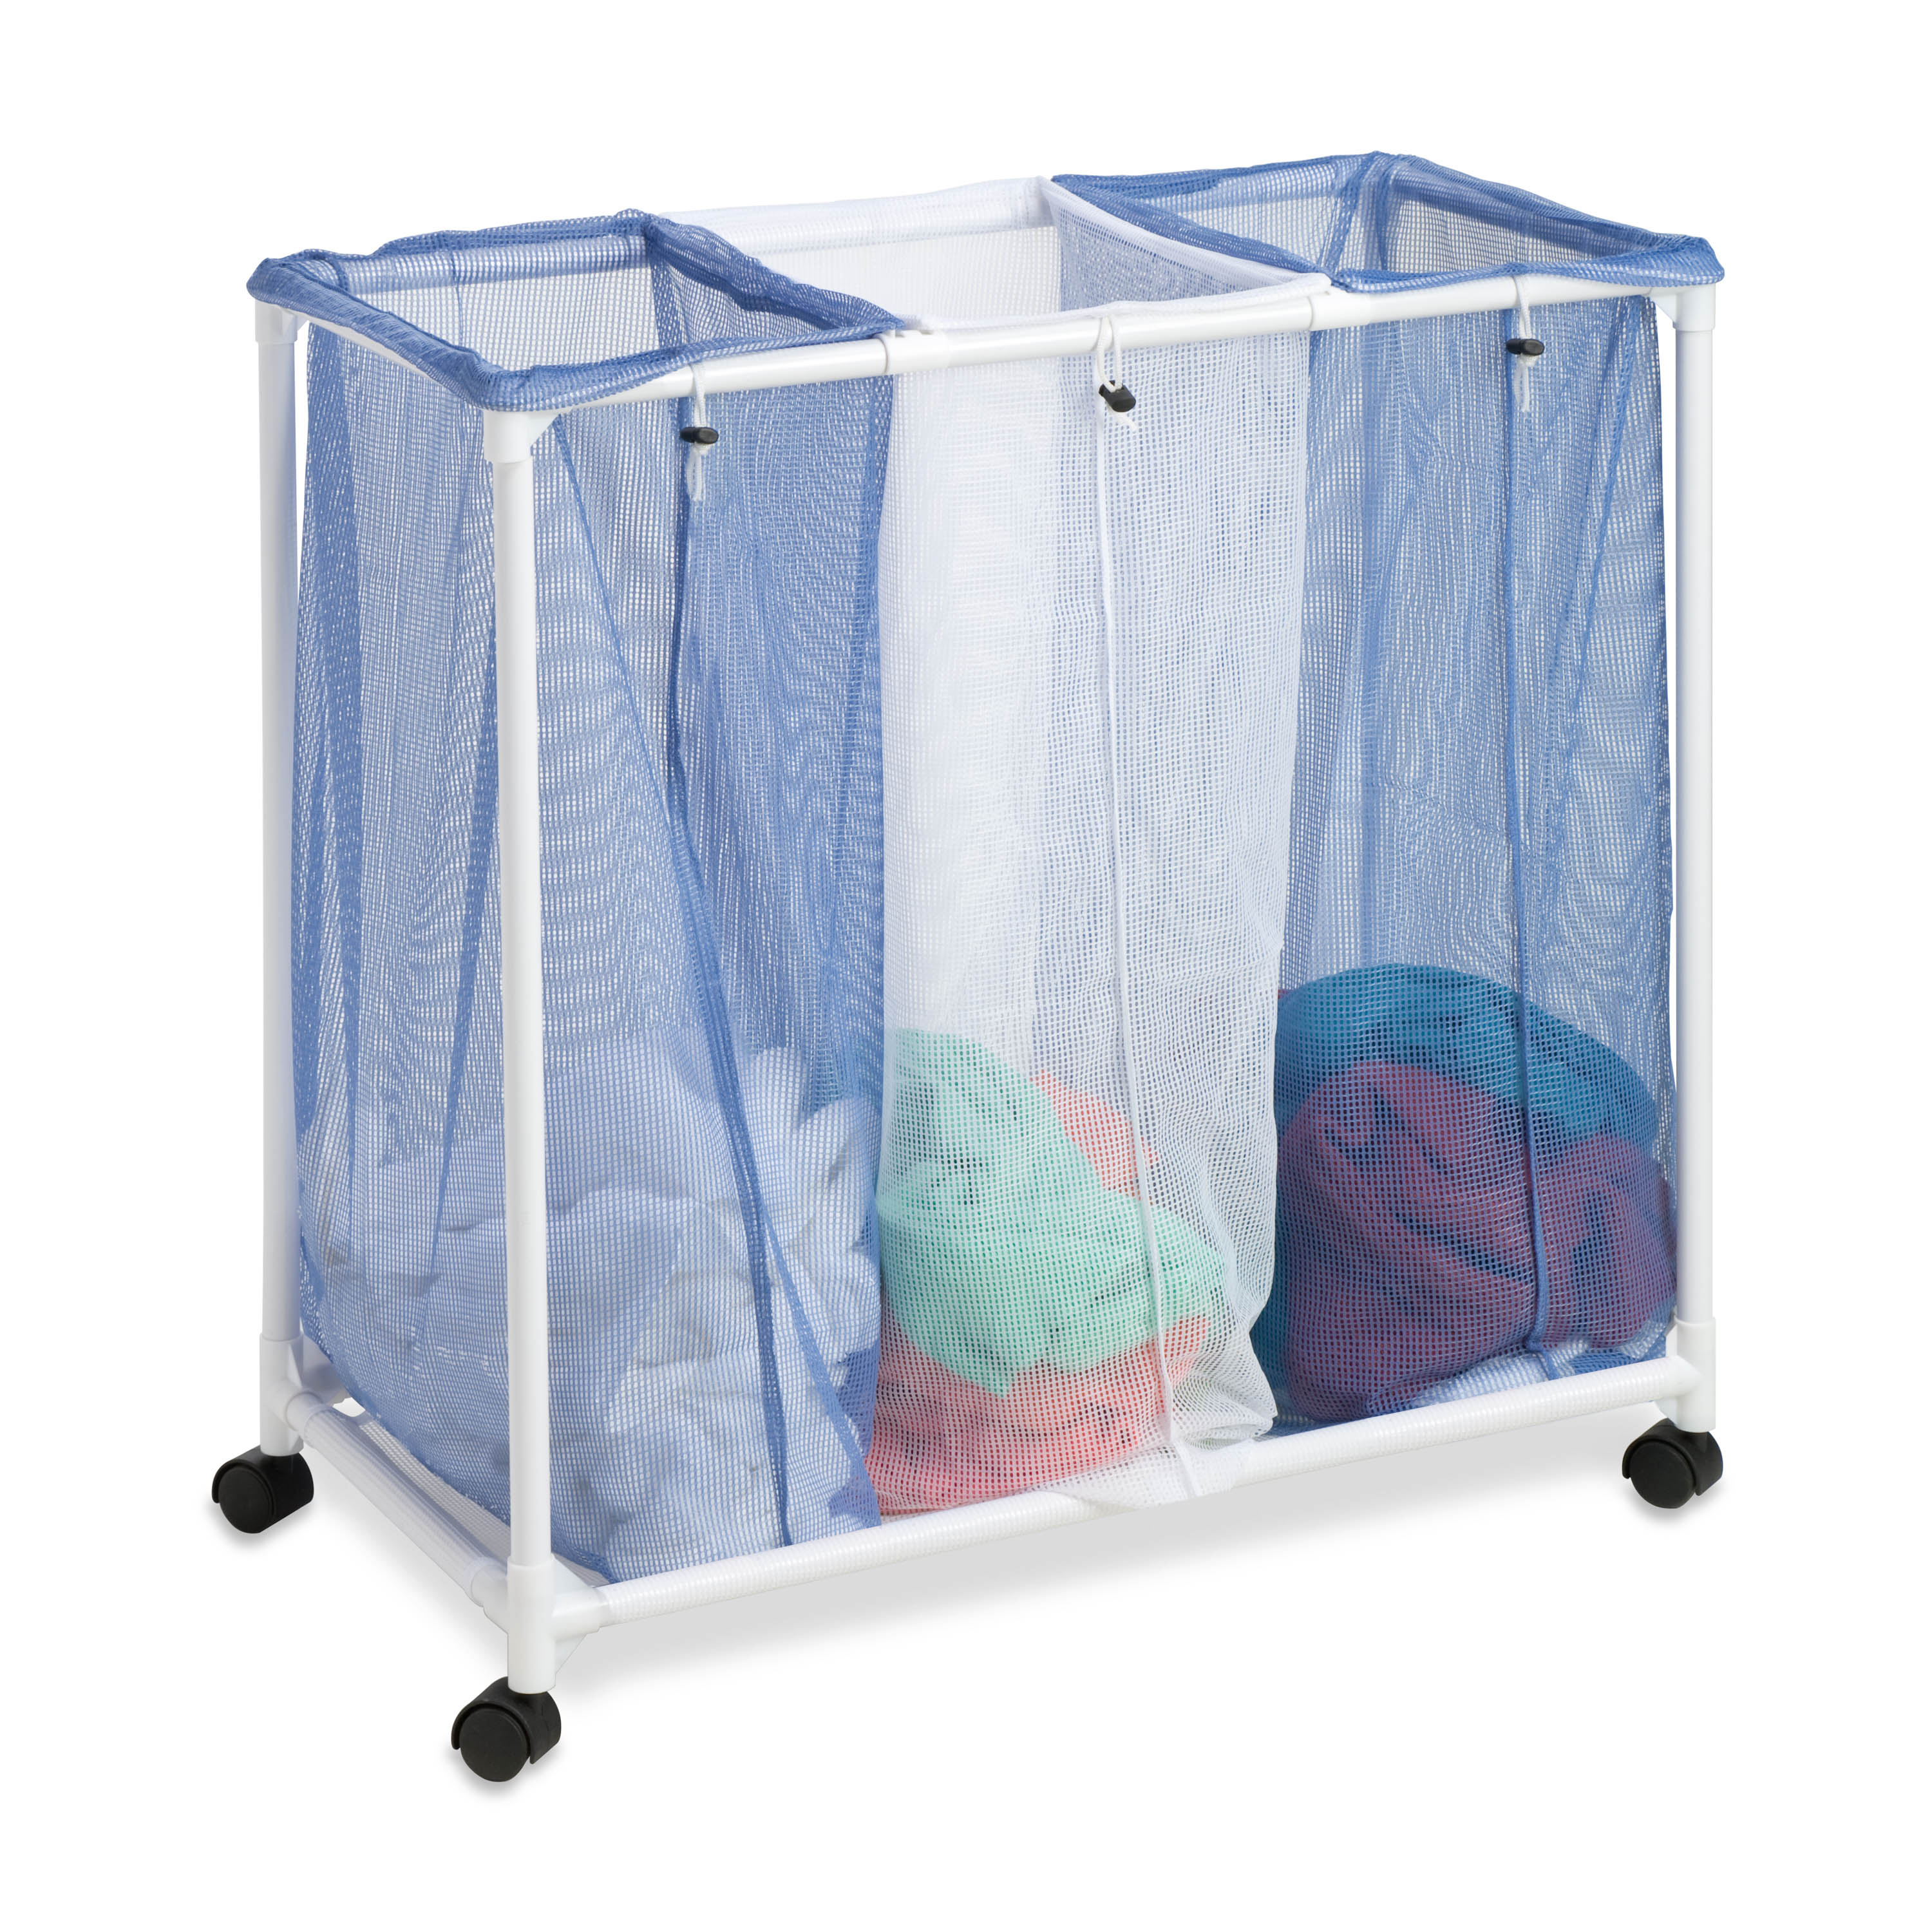 Honey-Can-Do Plastic 3-Compartment Polyester Mesh Rolling Laundry Sorter, Blue and White - image 2 of 3